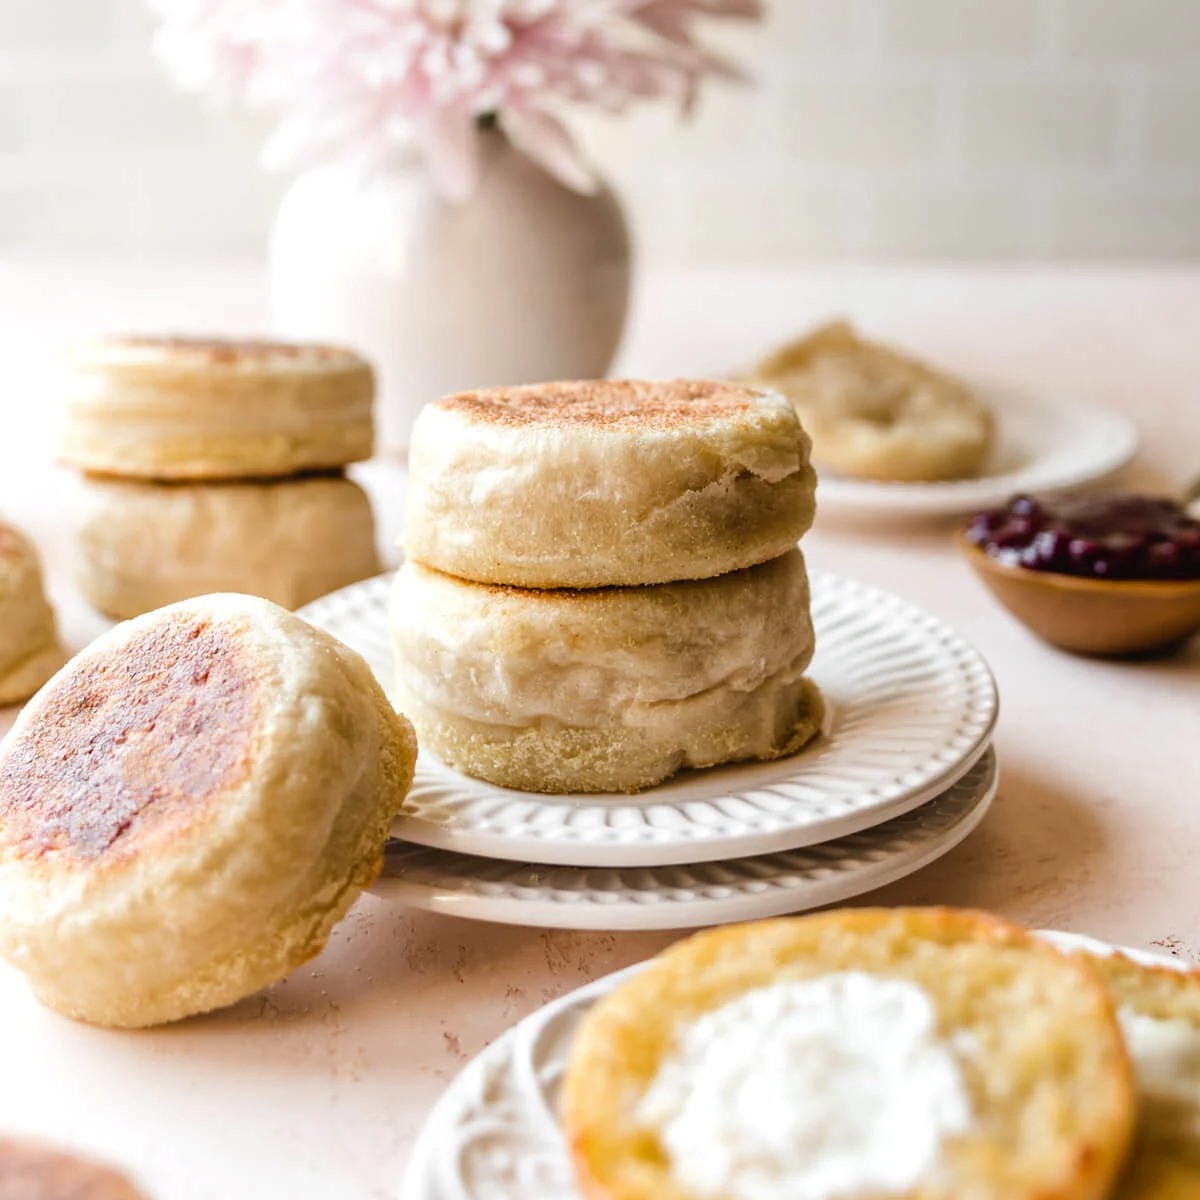 How To Store English Muffins